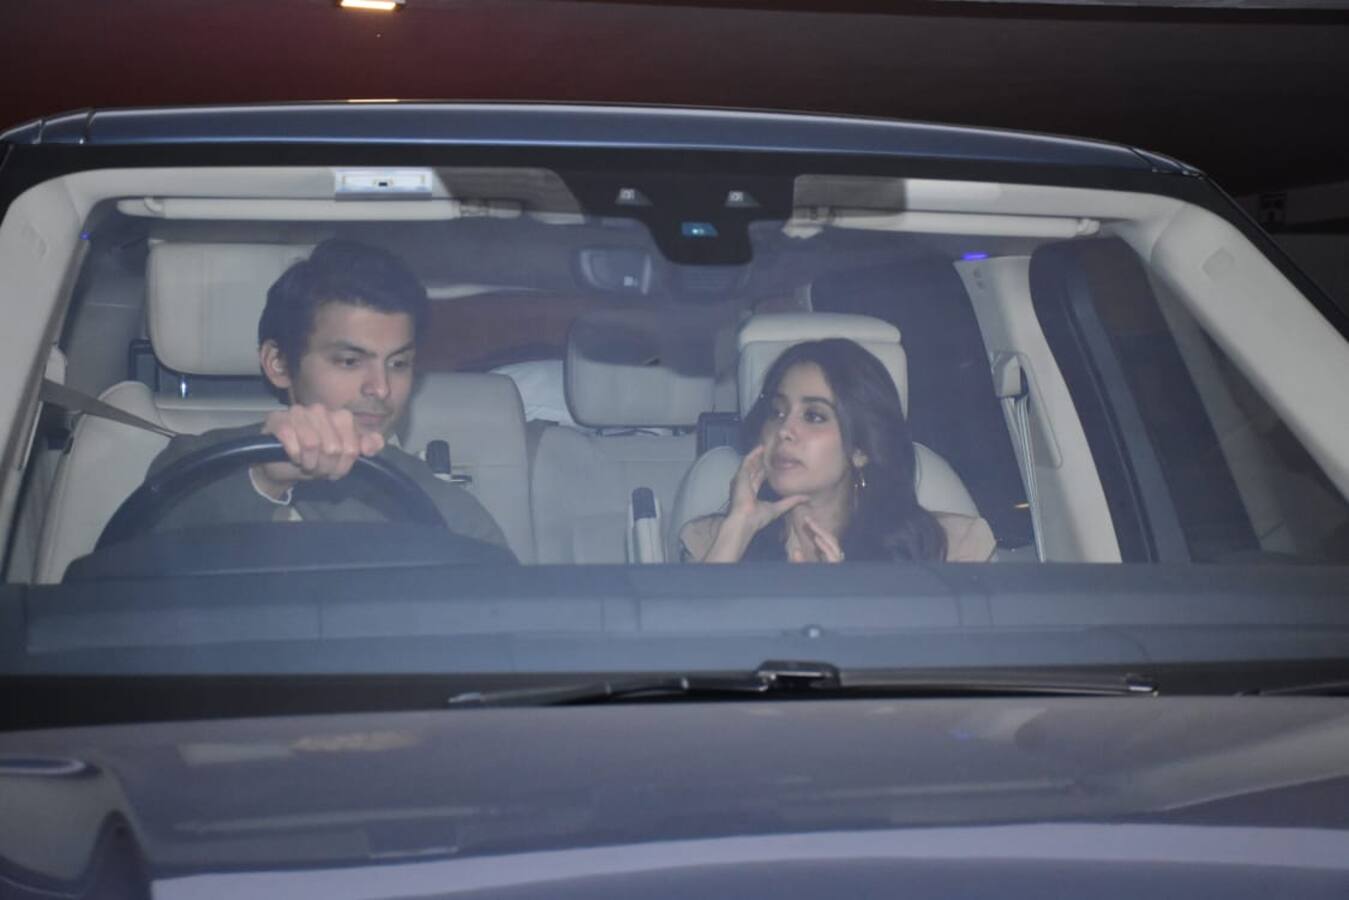 Janhvi Kapoor and rumoured ex beau Shikhar Pahariya reconcile? Is this why they're back together?